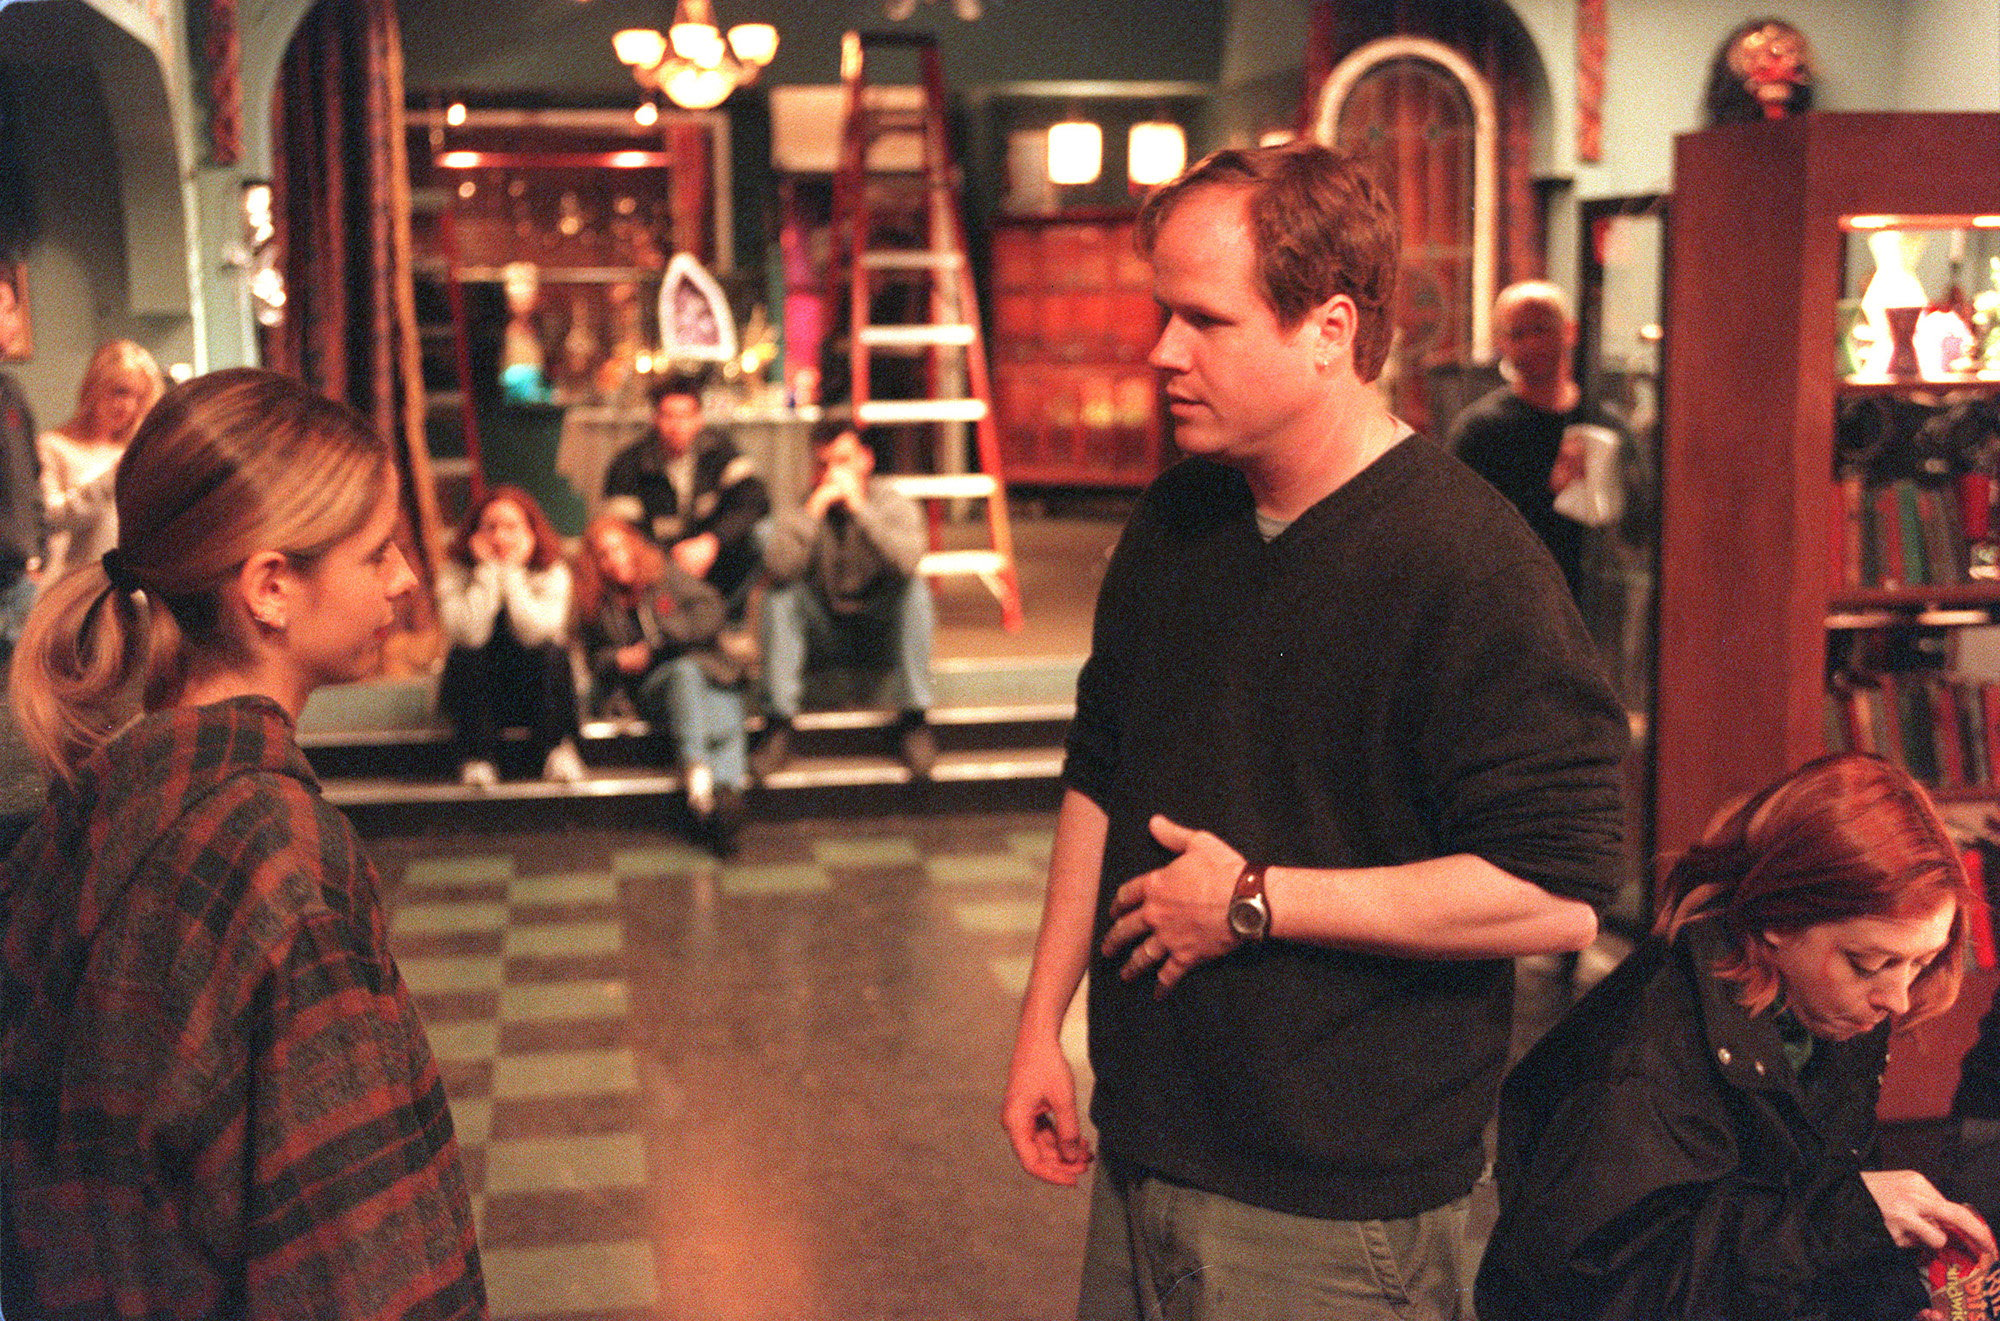 Joss Whedon (right) and Sarah Michelle Gellar on the set of 'Buffy the Vampire Slayer' 